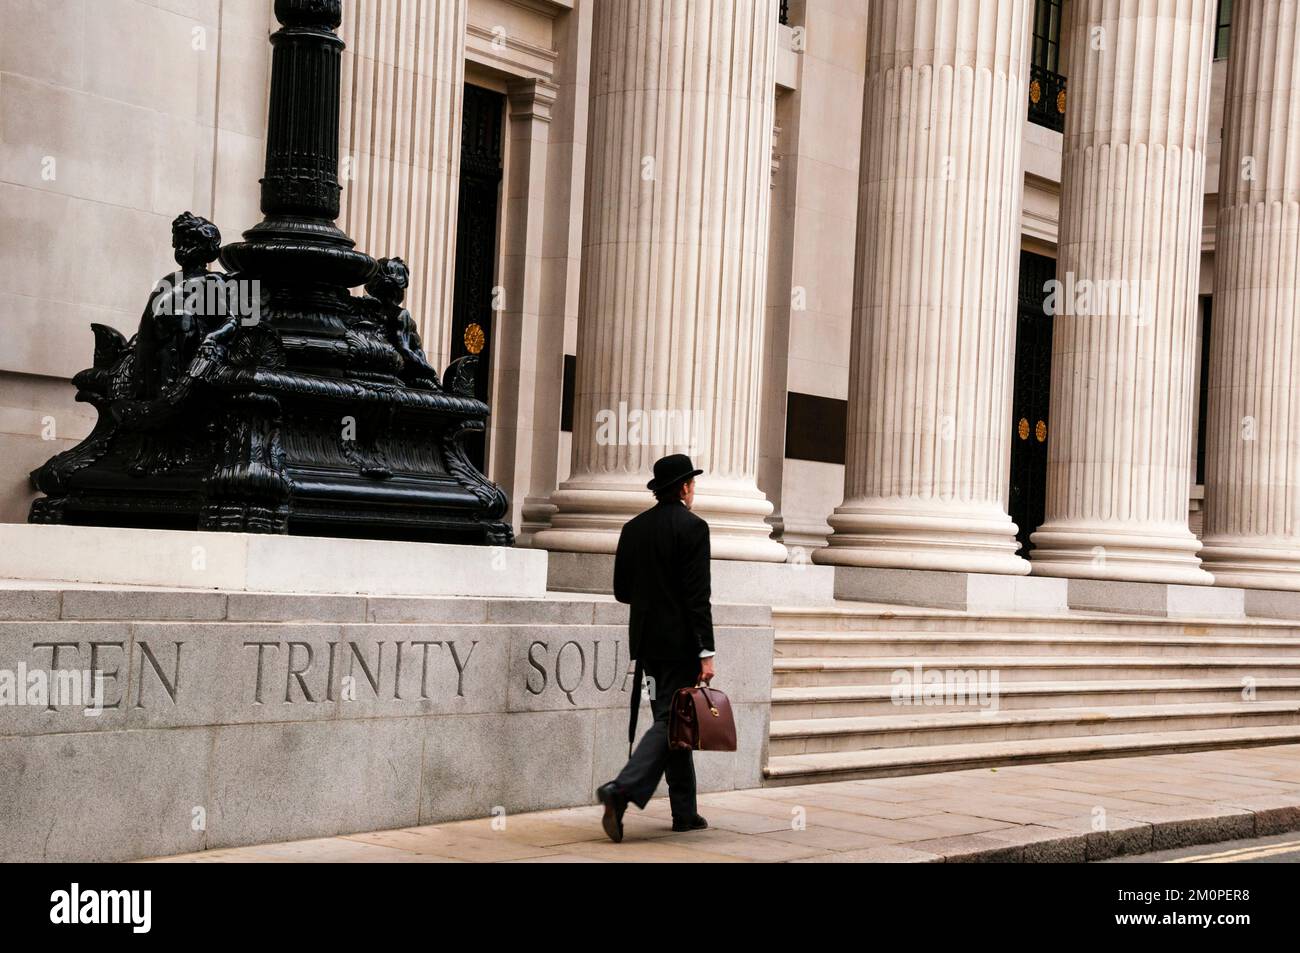 Ten Trinity Square in London is a Grade II listed Beaux-Arts building with a massive fluted columned grand staircase. Stock Photo